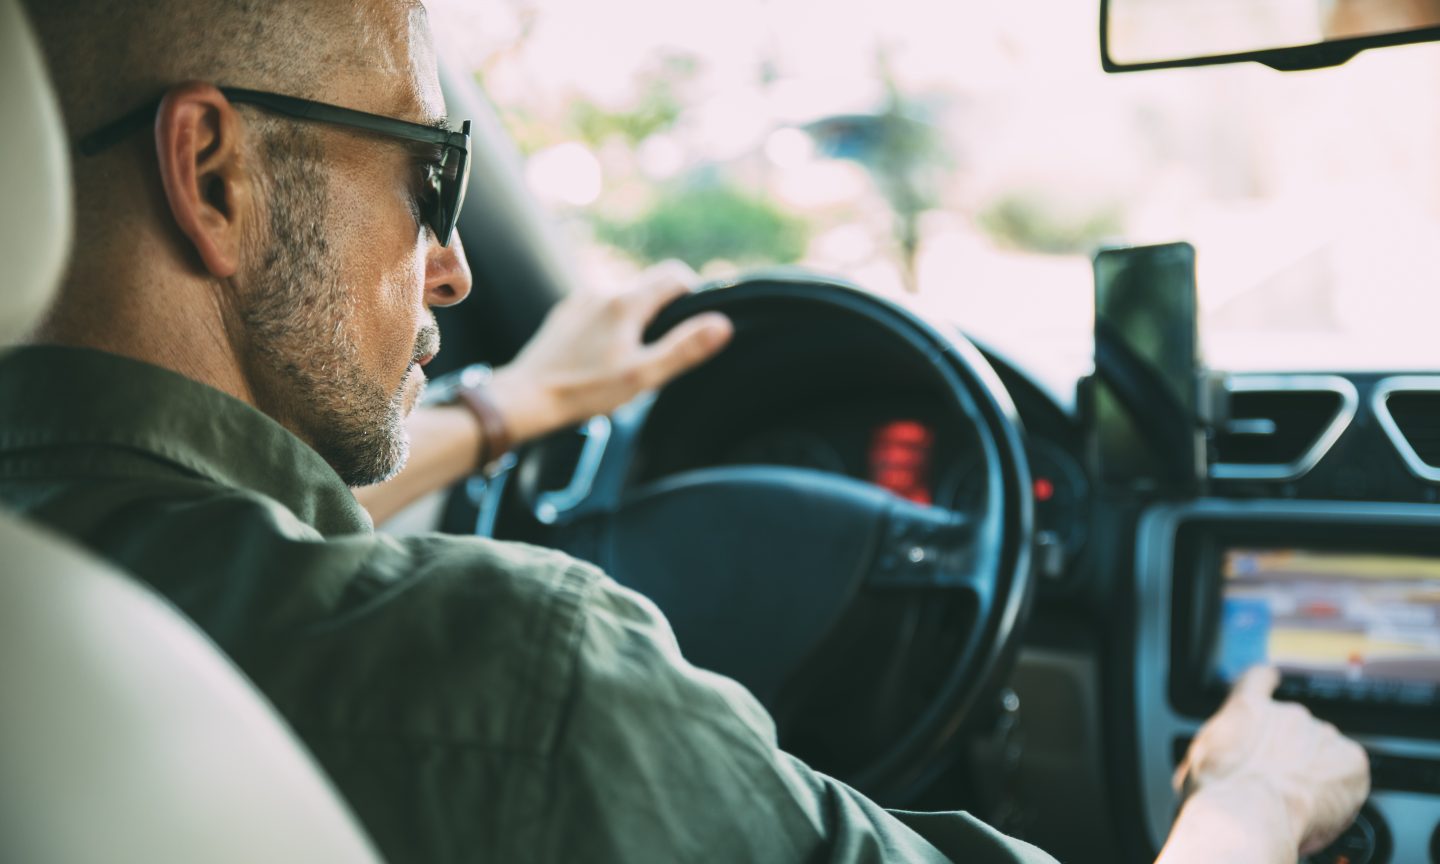 Direct Auto Insurance Review 2022: Pros and Cons - NerdWallet